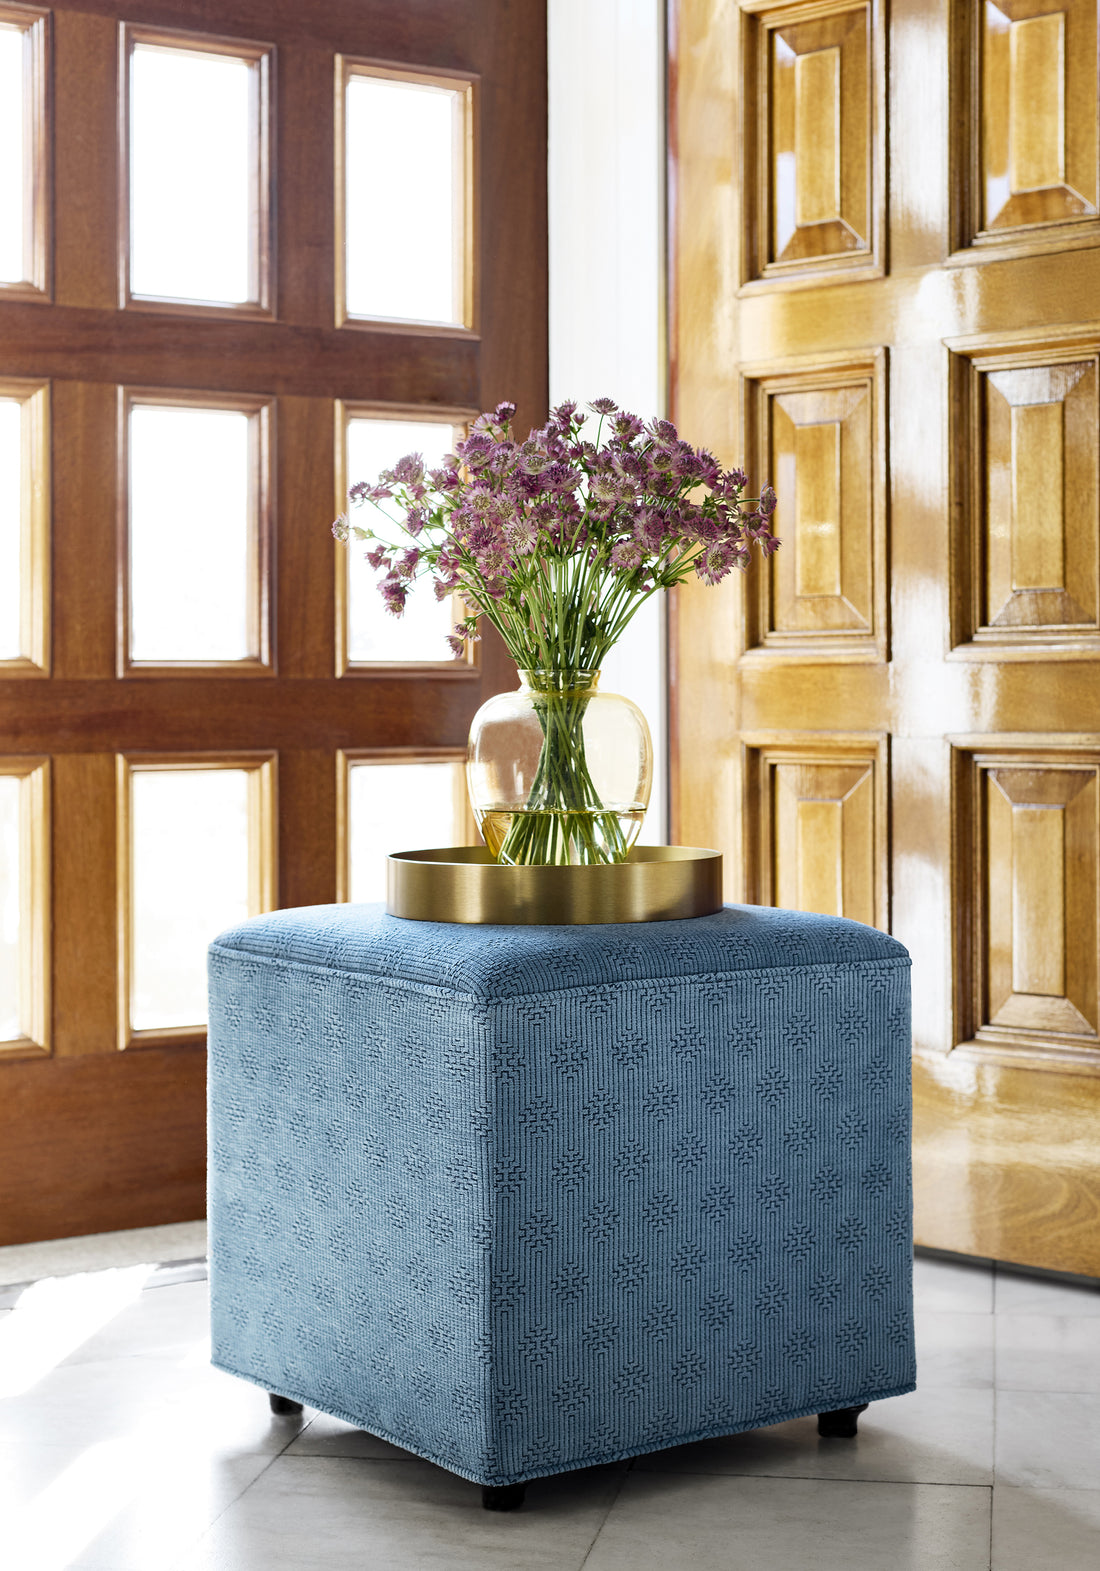 Fair and Square Ottoman in Crete woven fabric in Lake color - pattern number W74210 - by Thibaut in the Passage collection